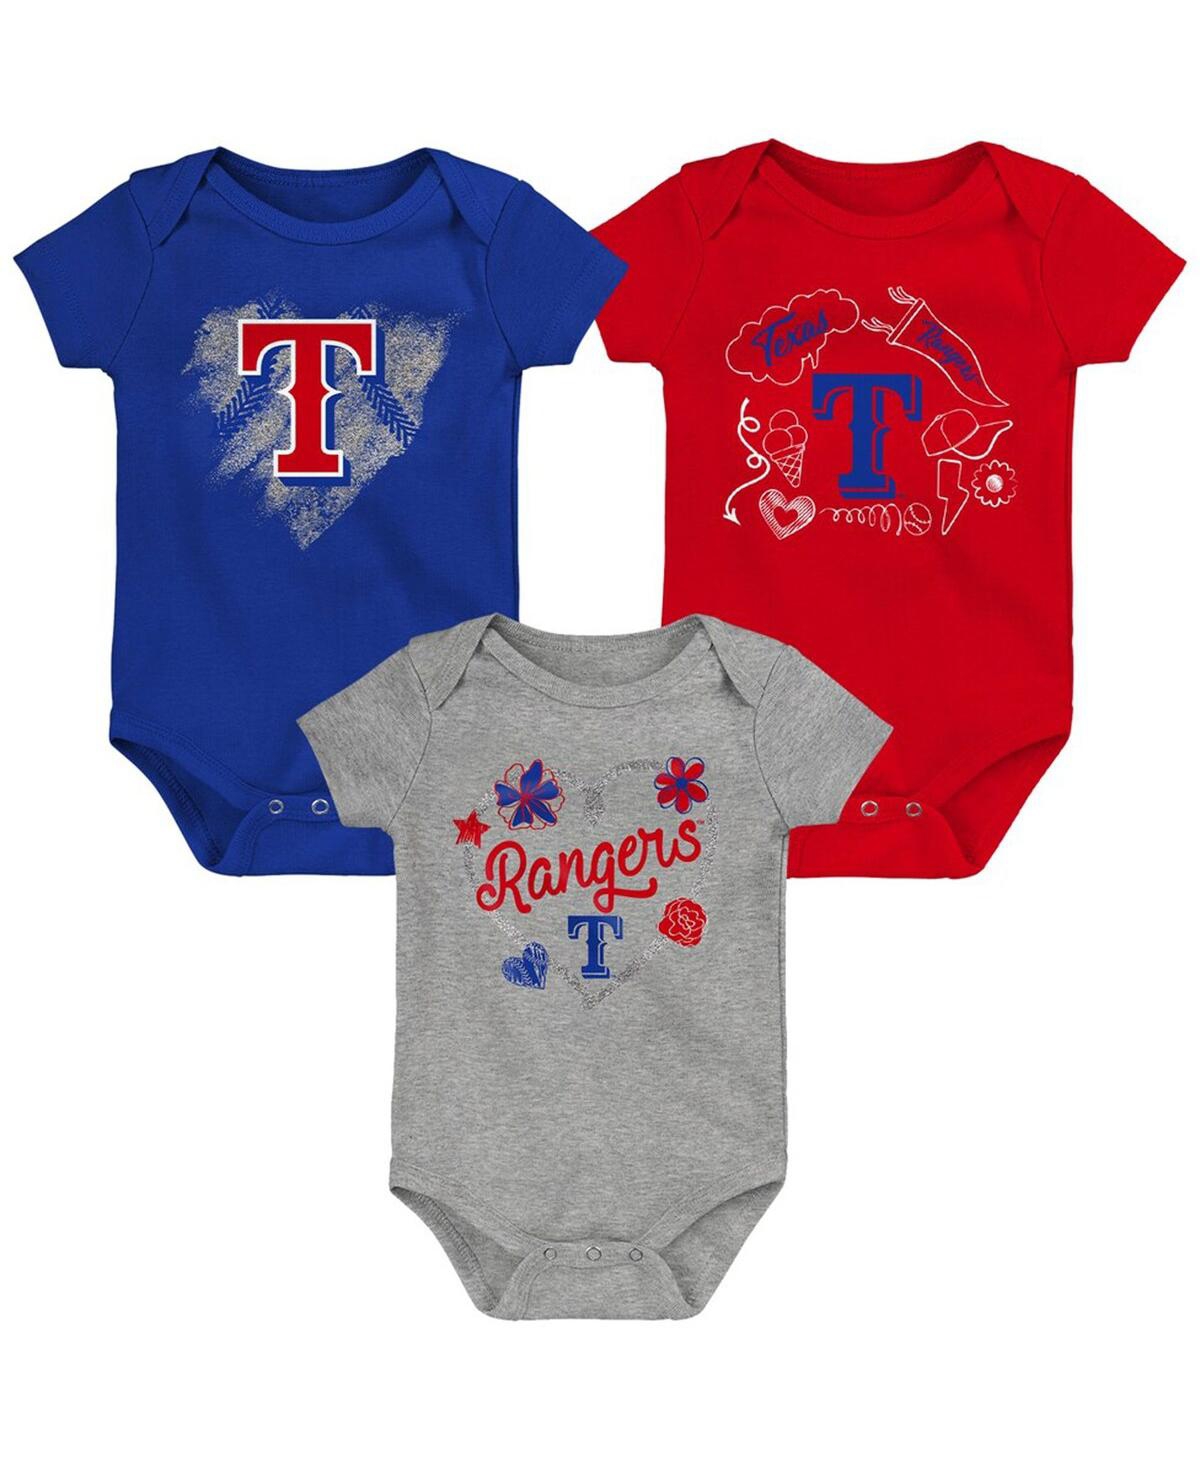 Shop Outerstuff Infant Boys And Girls Royal, Red, Gray Texas Rangers Batter Up 3-pack Bodysuit Set In Royal,red,gray